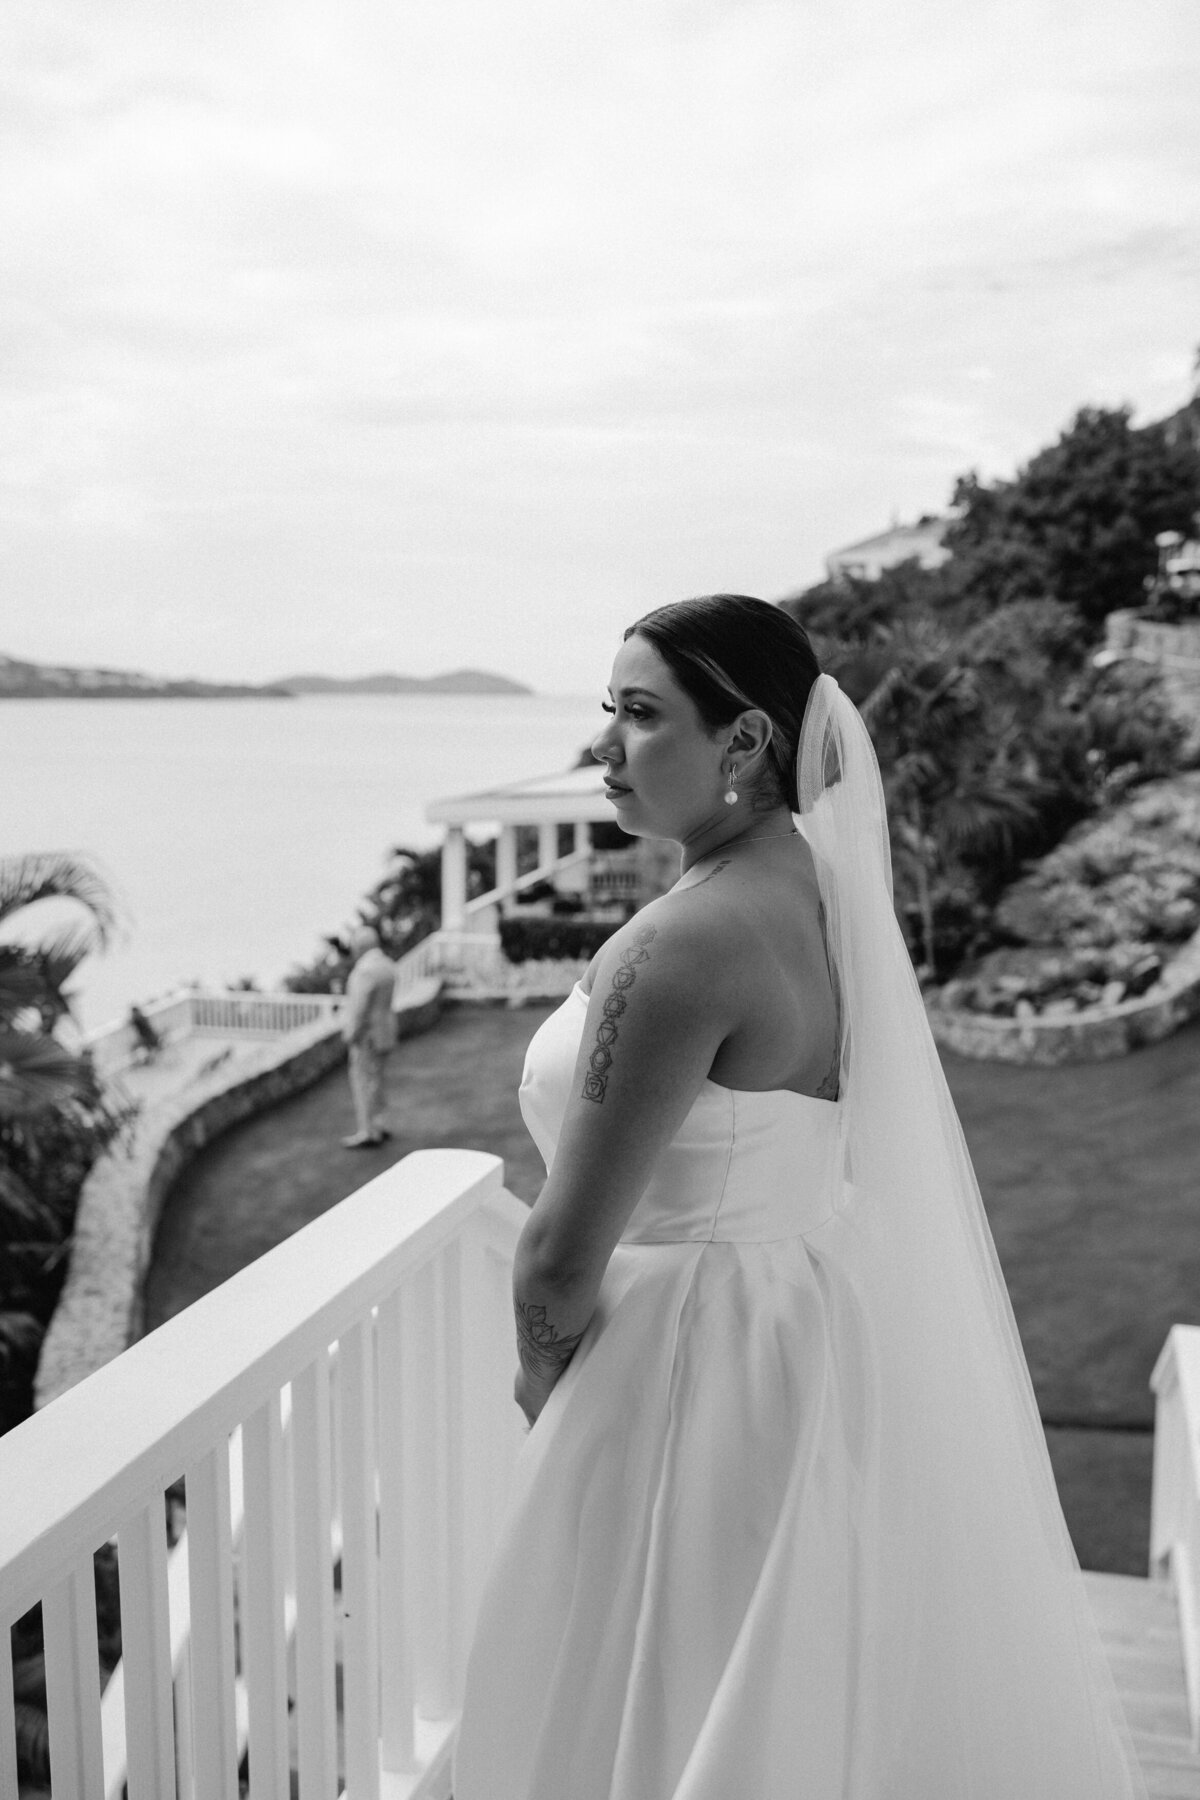 A bride in a white gown looking pensively over a balcony with a scenic ocean view in the background